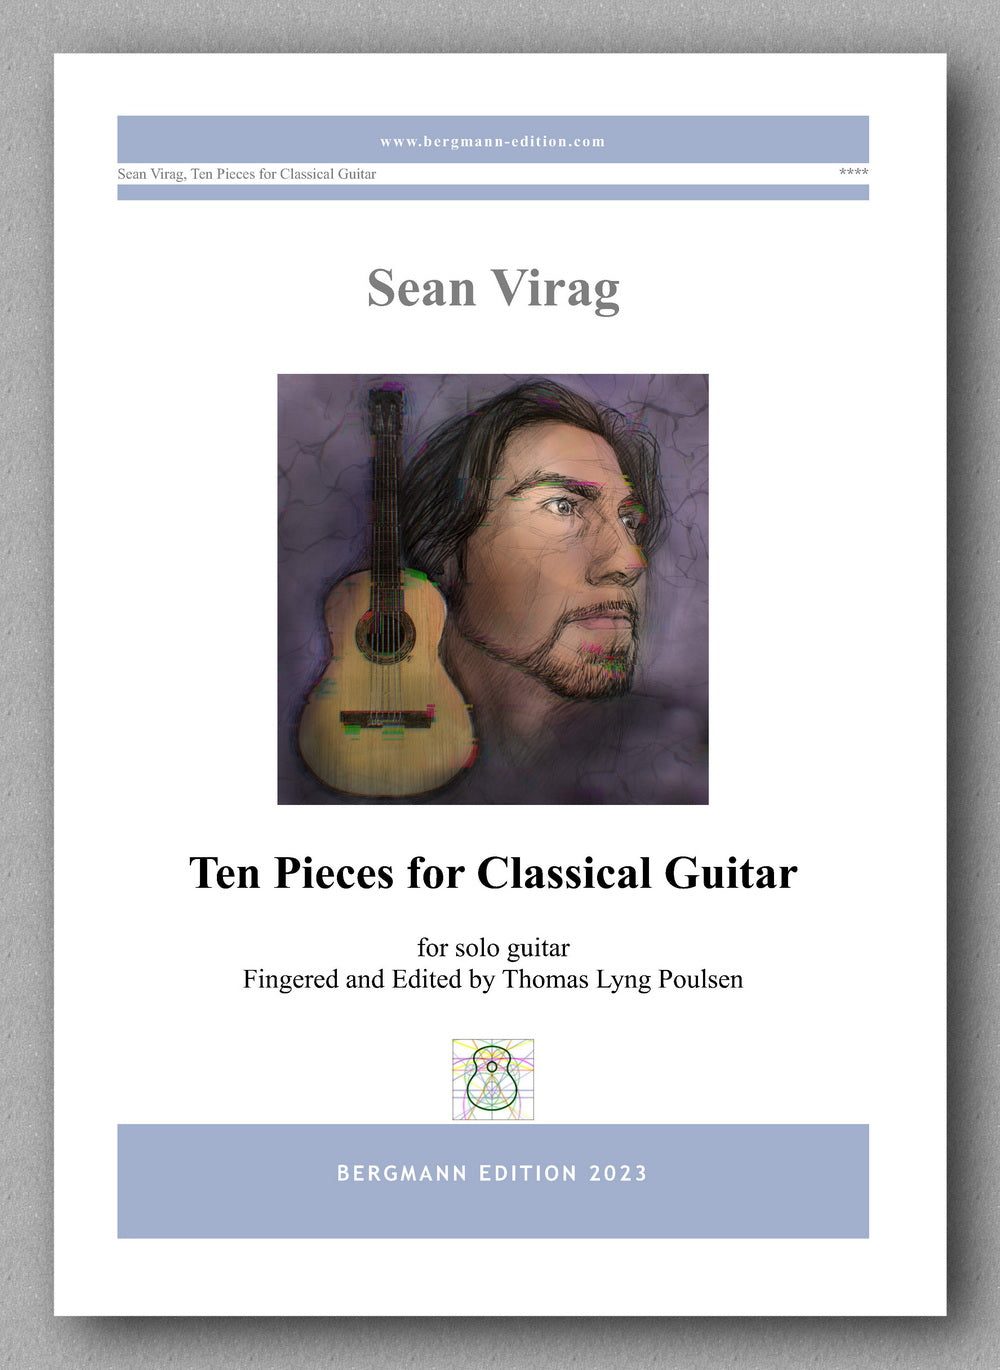 Sean Virag, Ten Pieces for Classical Guitar - preview of the cover